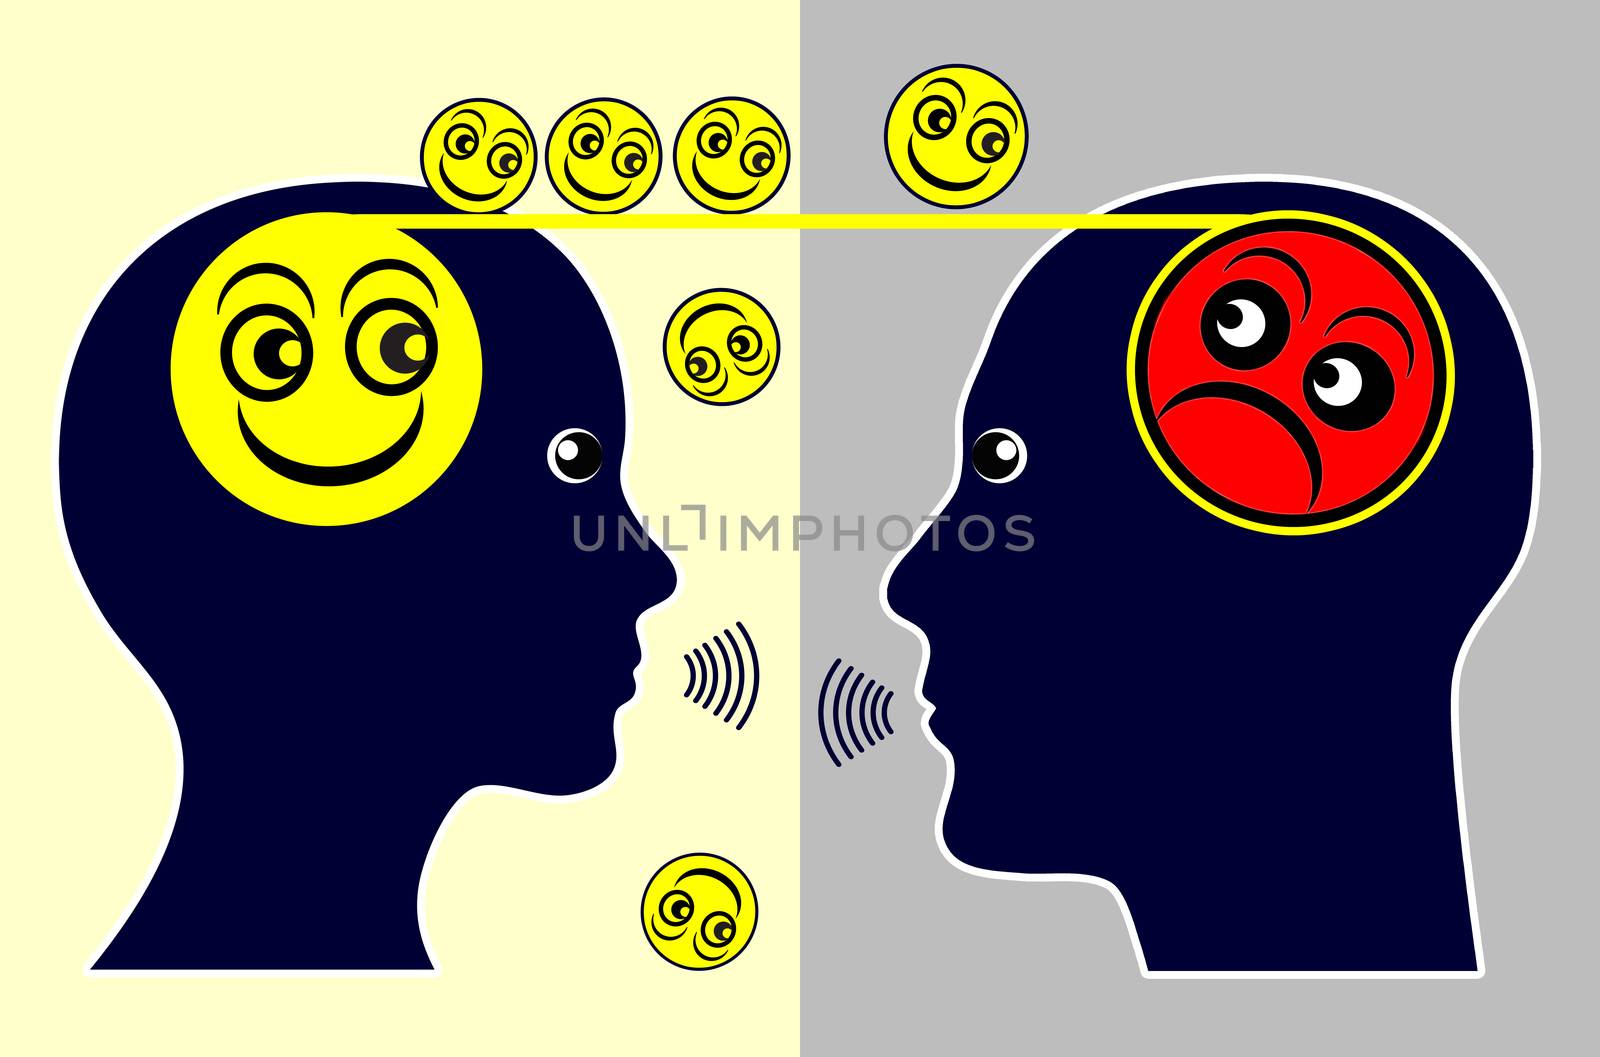 Concept sign of a psychotherapist treating a patient by talking with him